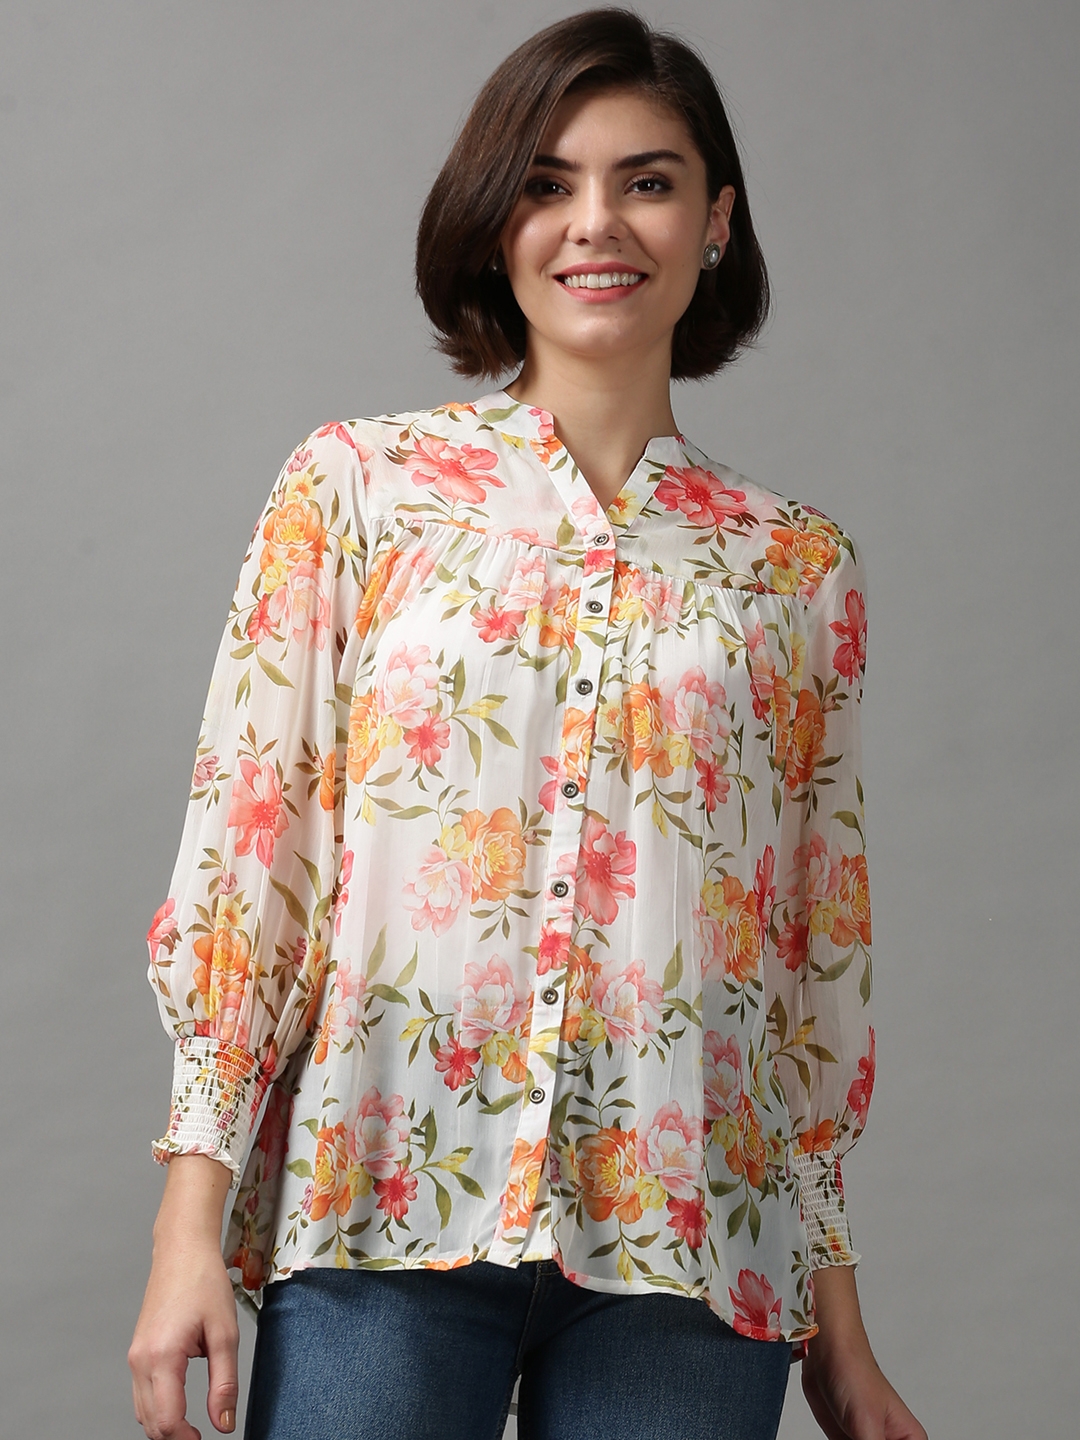 SHOWOFF Women's Regular Sleeves Floral White Shirt Style Top